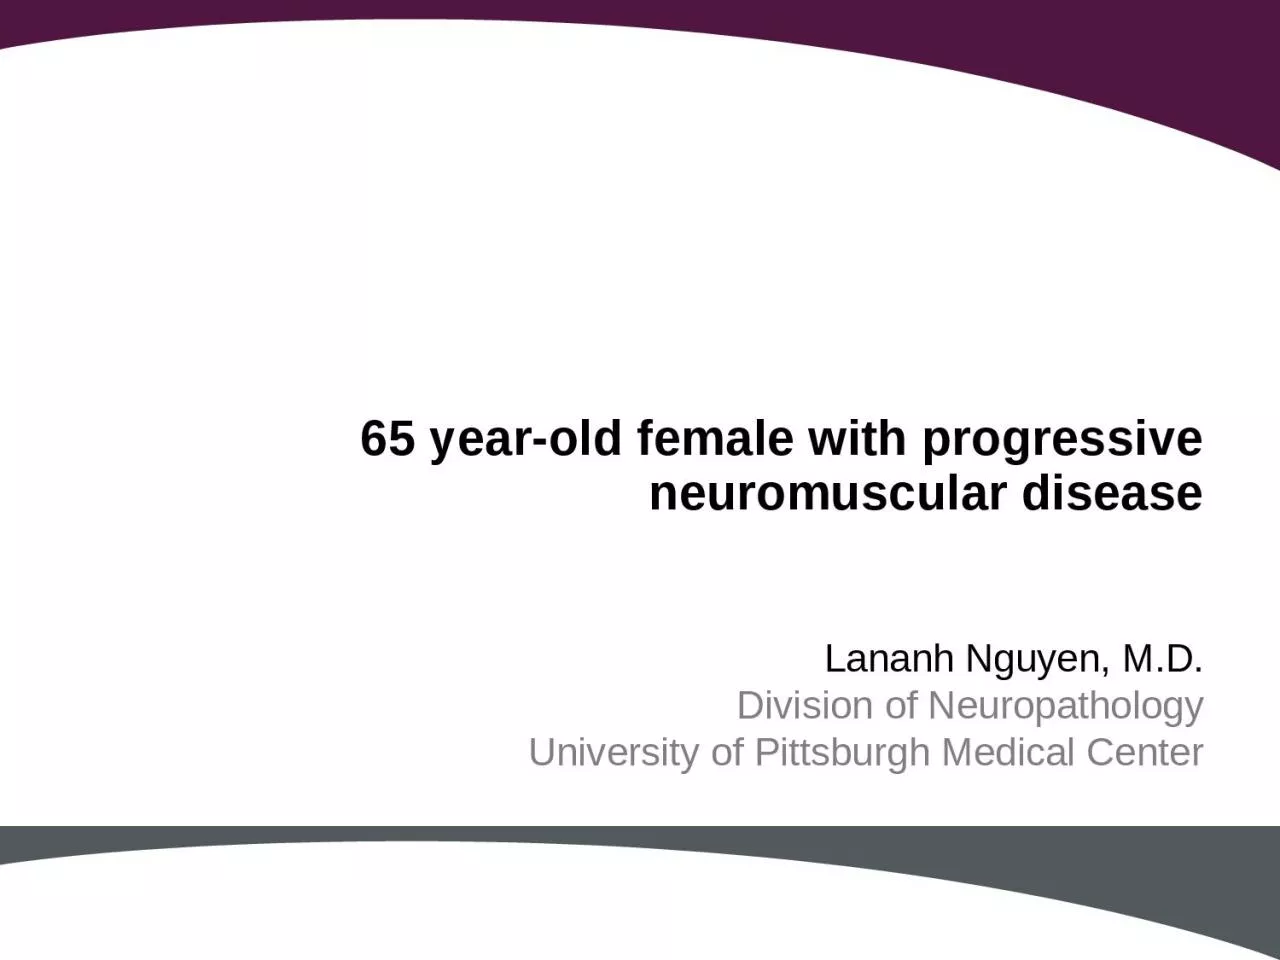 65 year-old female with progressive neuromuscular disease